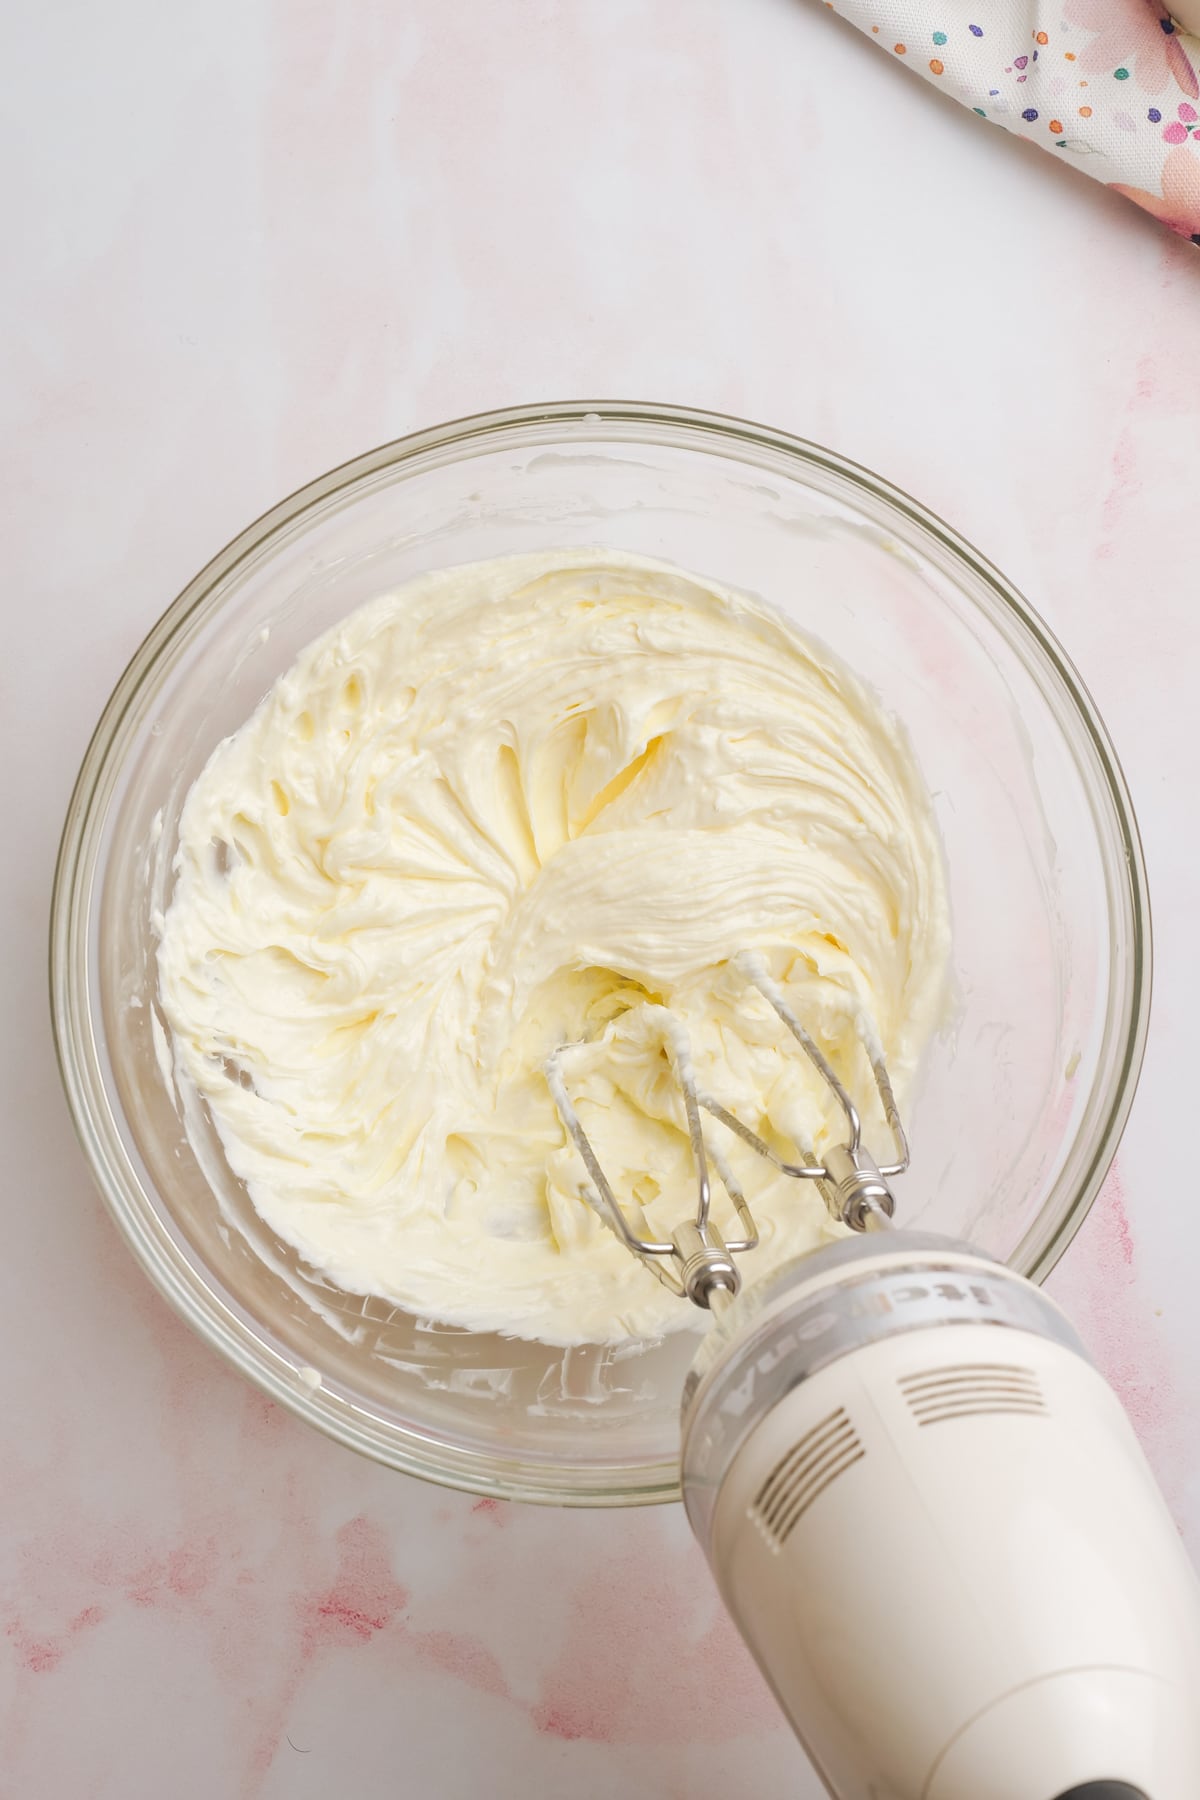 Mix frosting with hand mixer